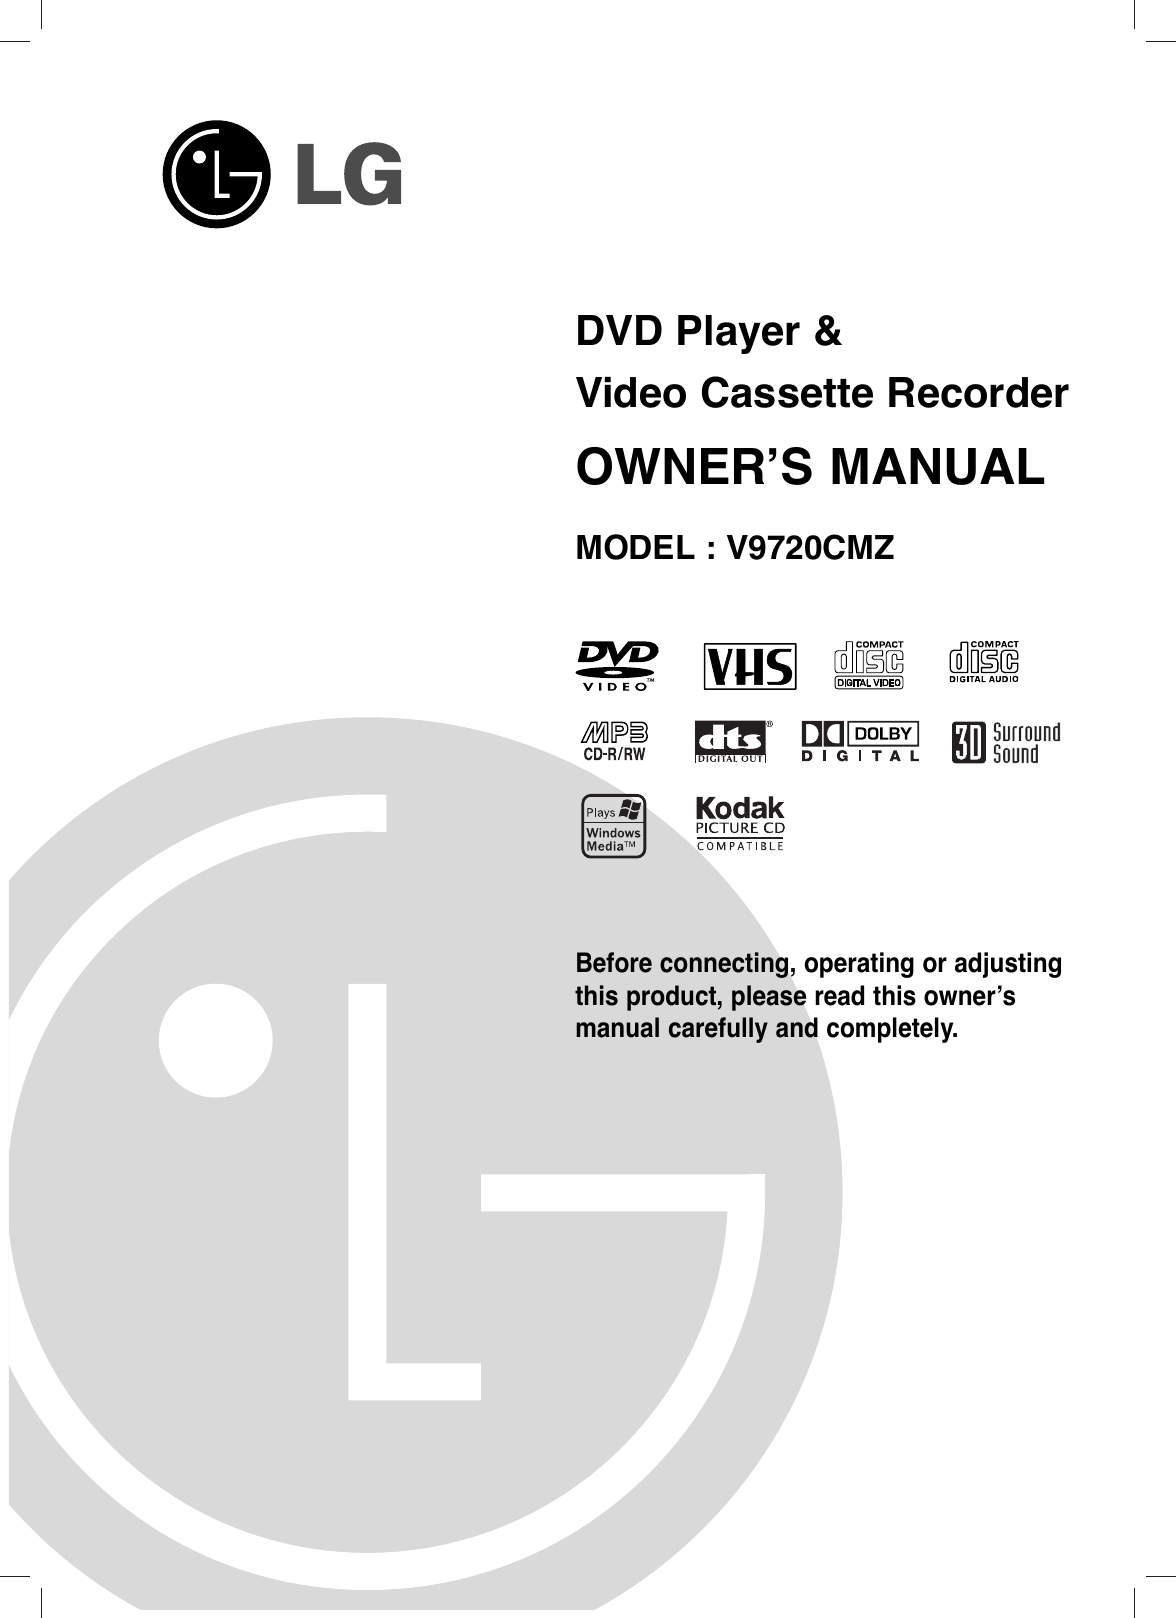 Before connecting, operating or adjustingthis product, please read this owner’smanual carefully and completely.DVD Player &amp;Video Cassette RecorderOWNER’S MANUALMODEL : V9720CMZ